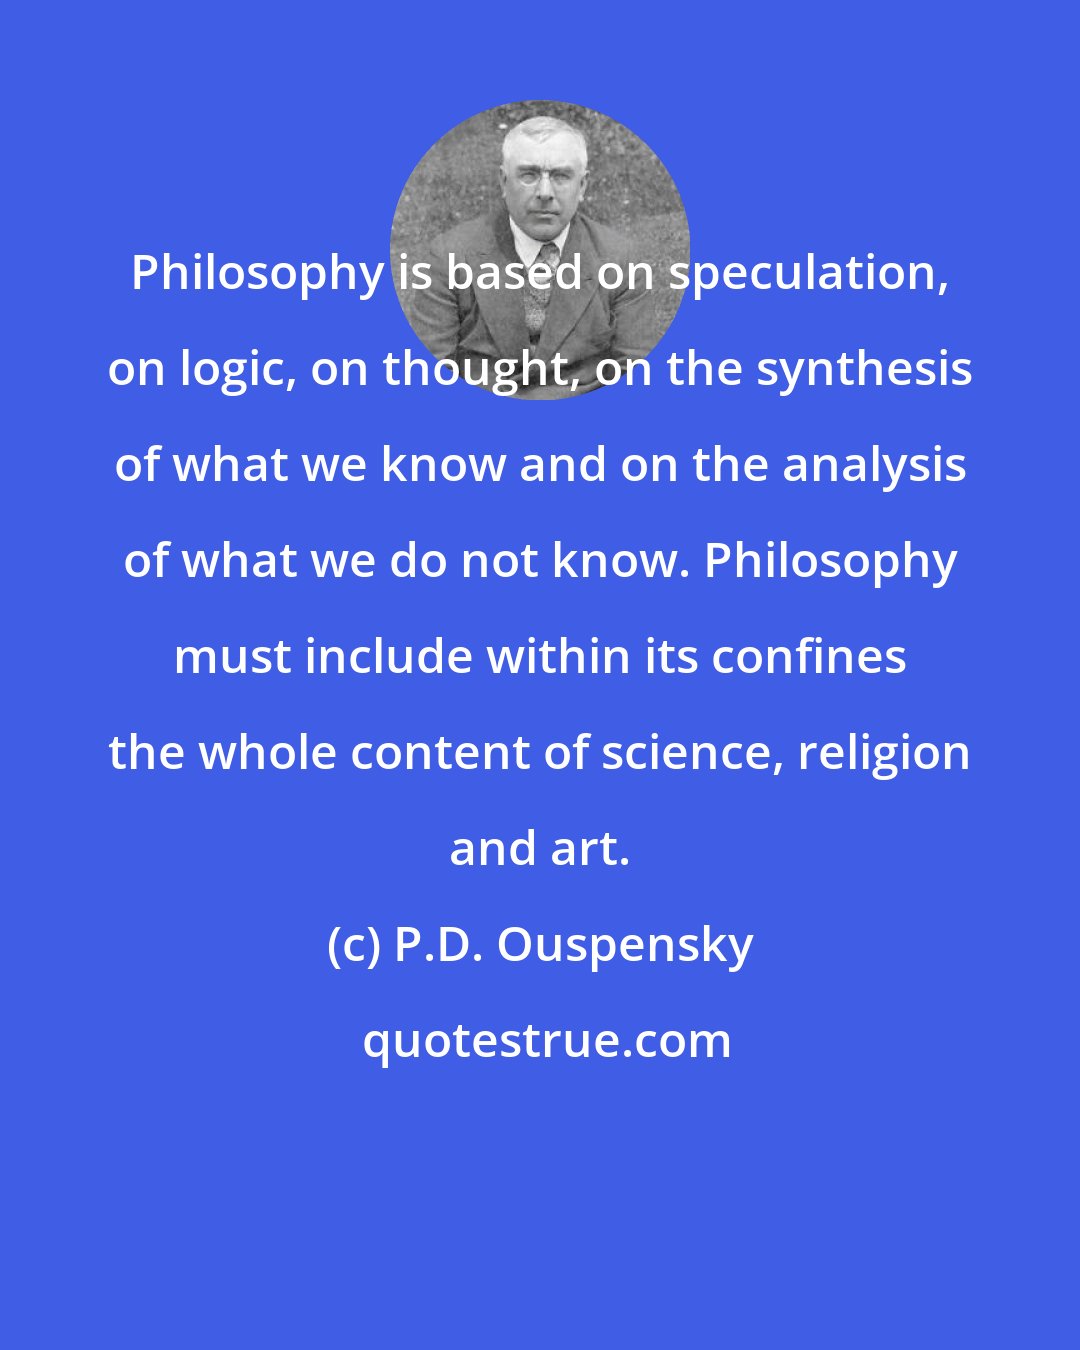 P.D. Ouspensky: Philosophy is based on speculation, on logic, on thought, on the synthesis of what we know and on the analysis of what we do not know. Philosophy must include within its confines the whole content of science, religion and art.